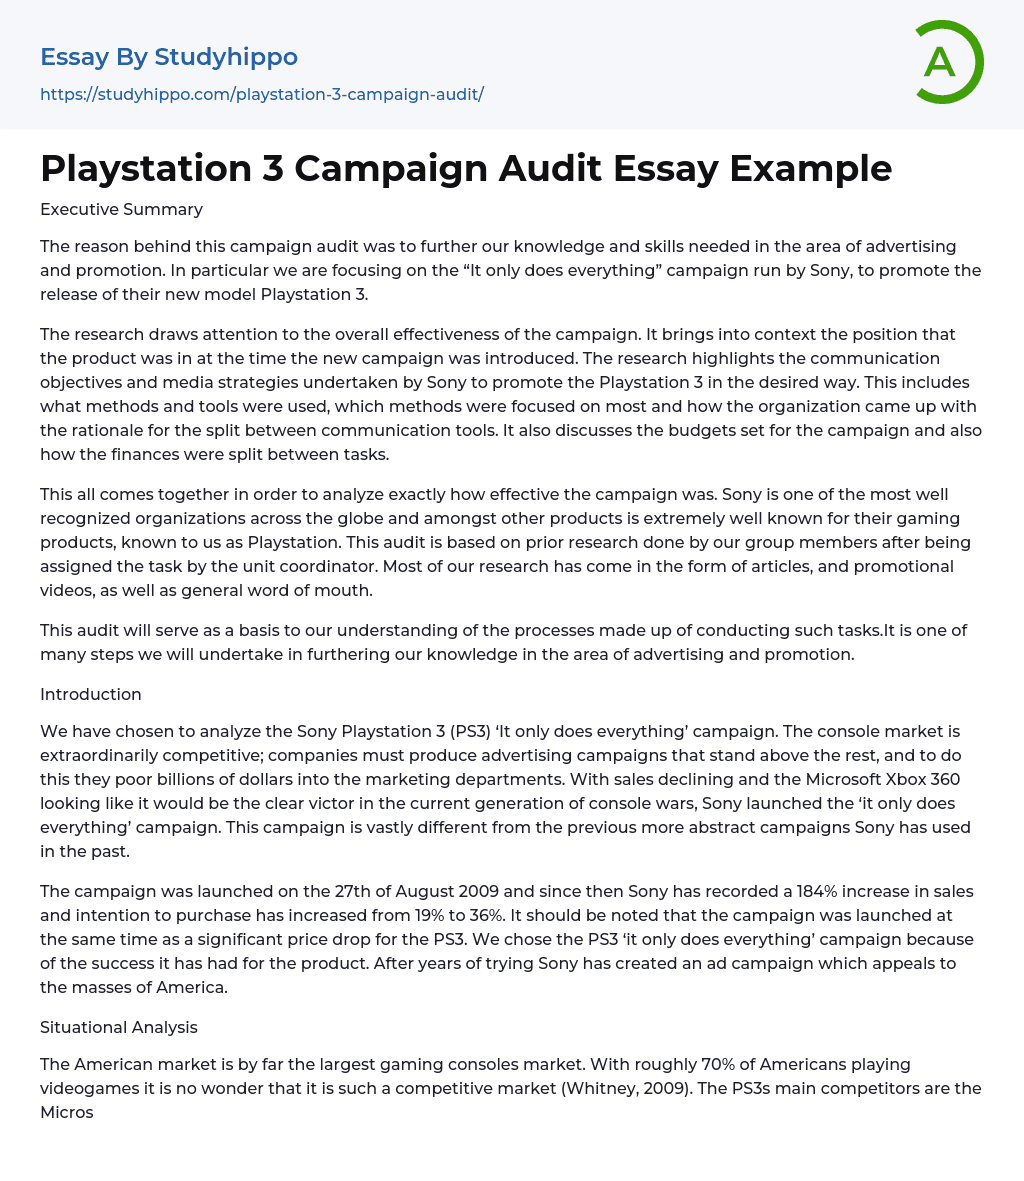 Playstation 3 Campaign Audit Essay Example